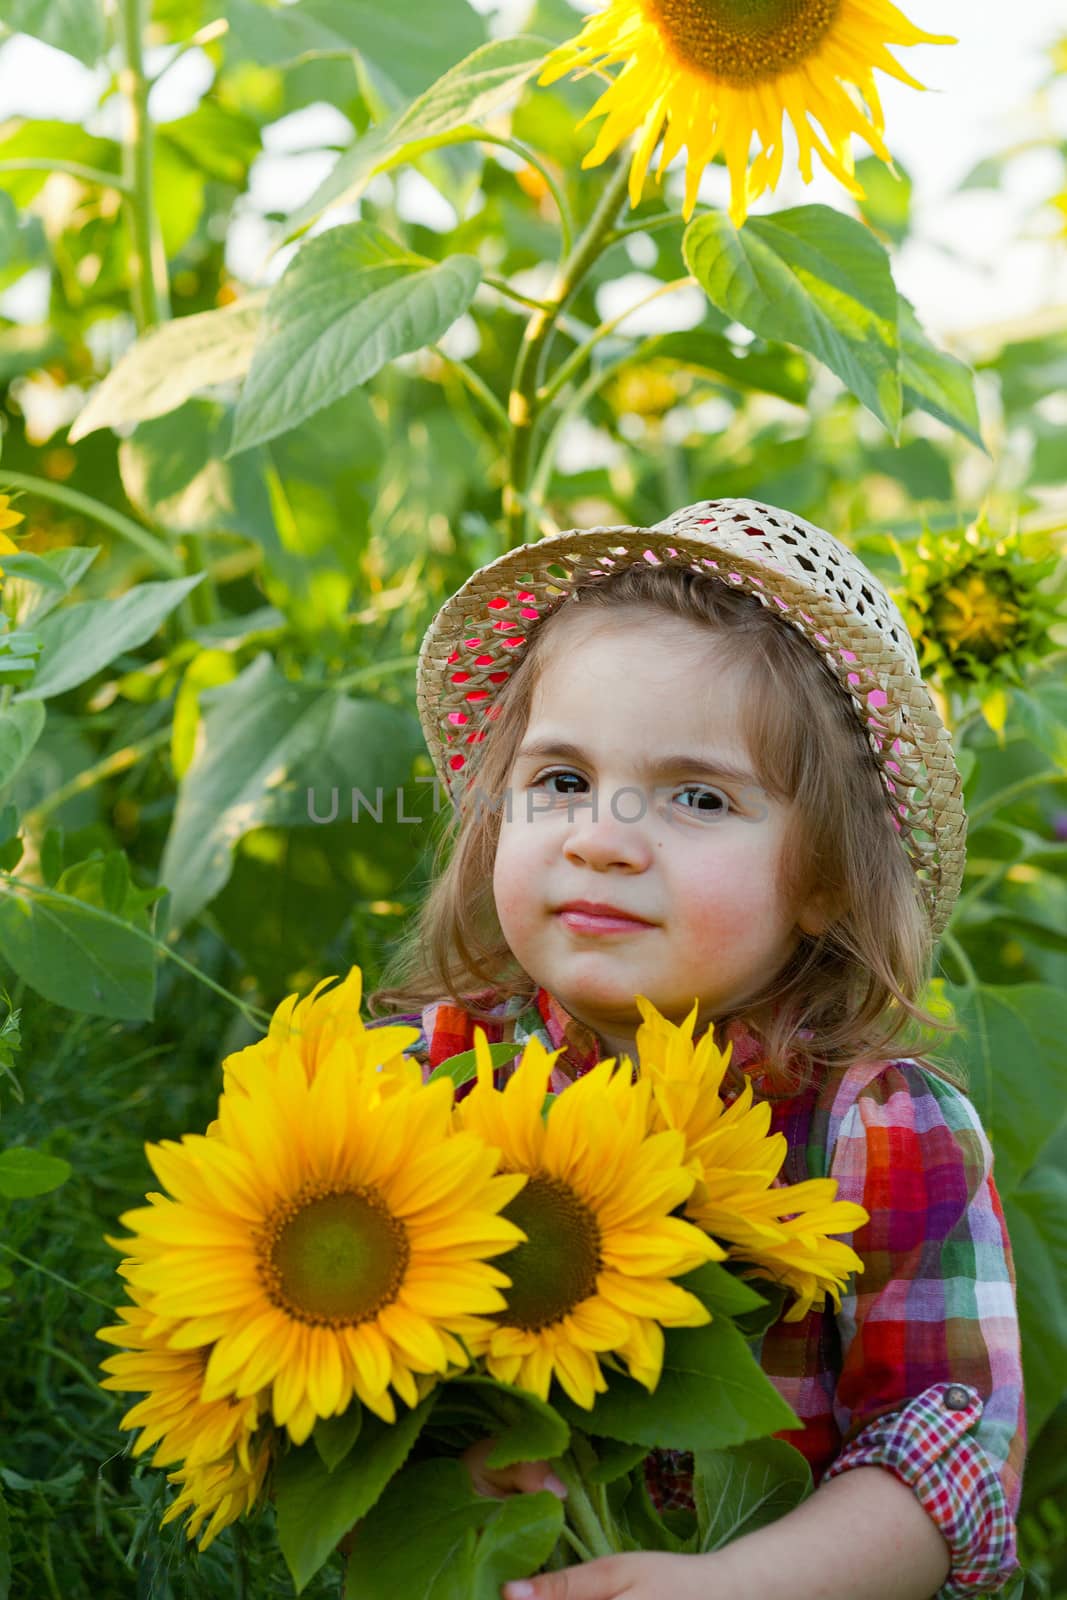 Little girl in a summer hat among sunflowers